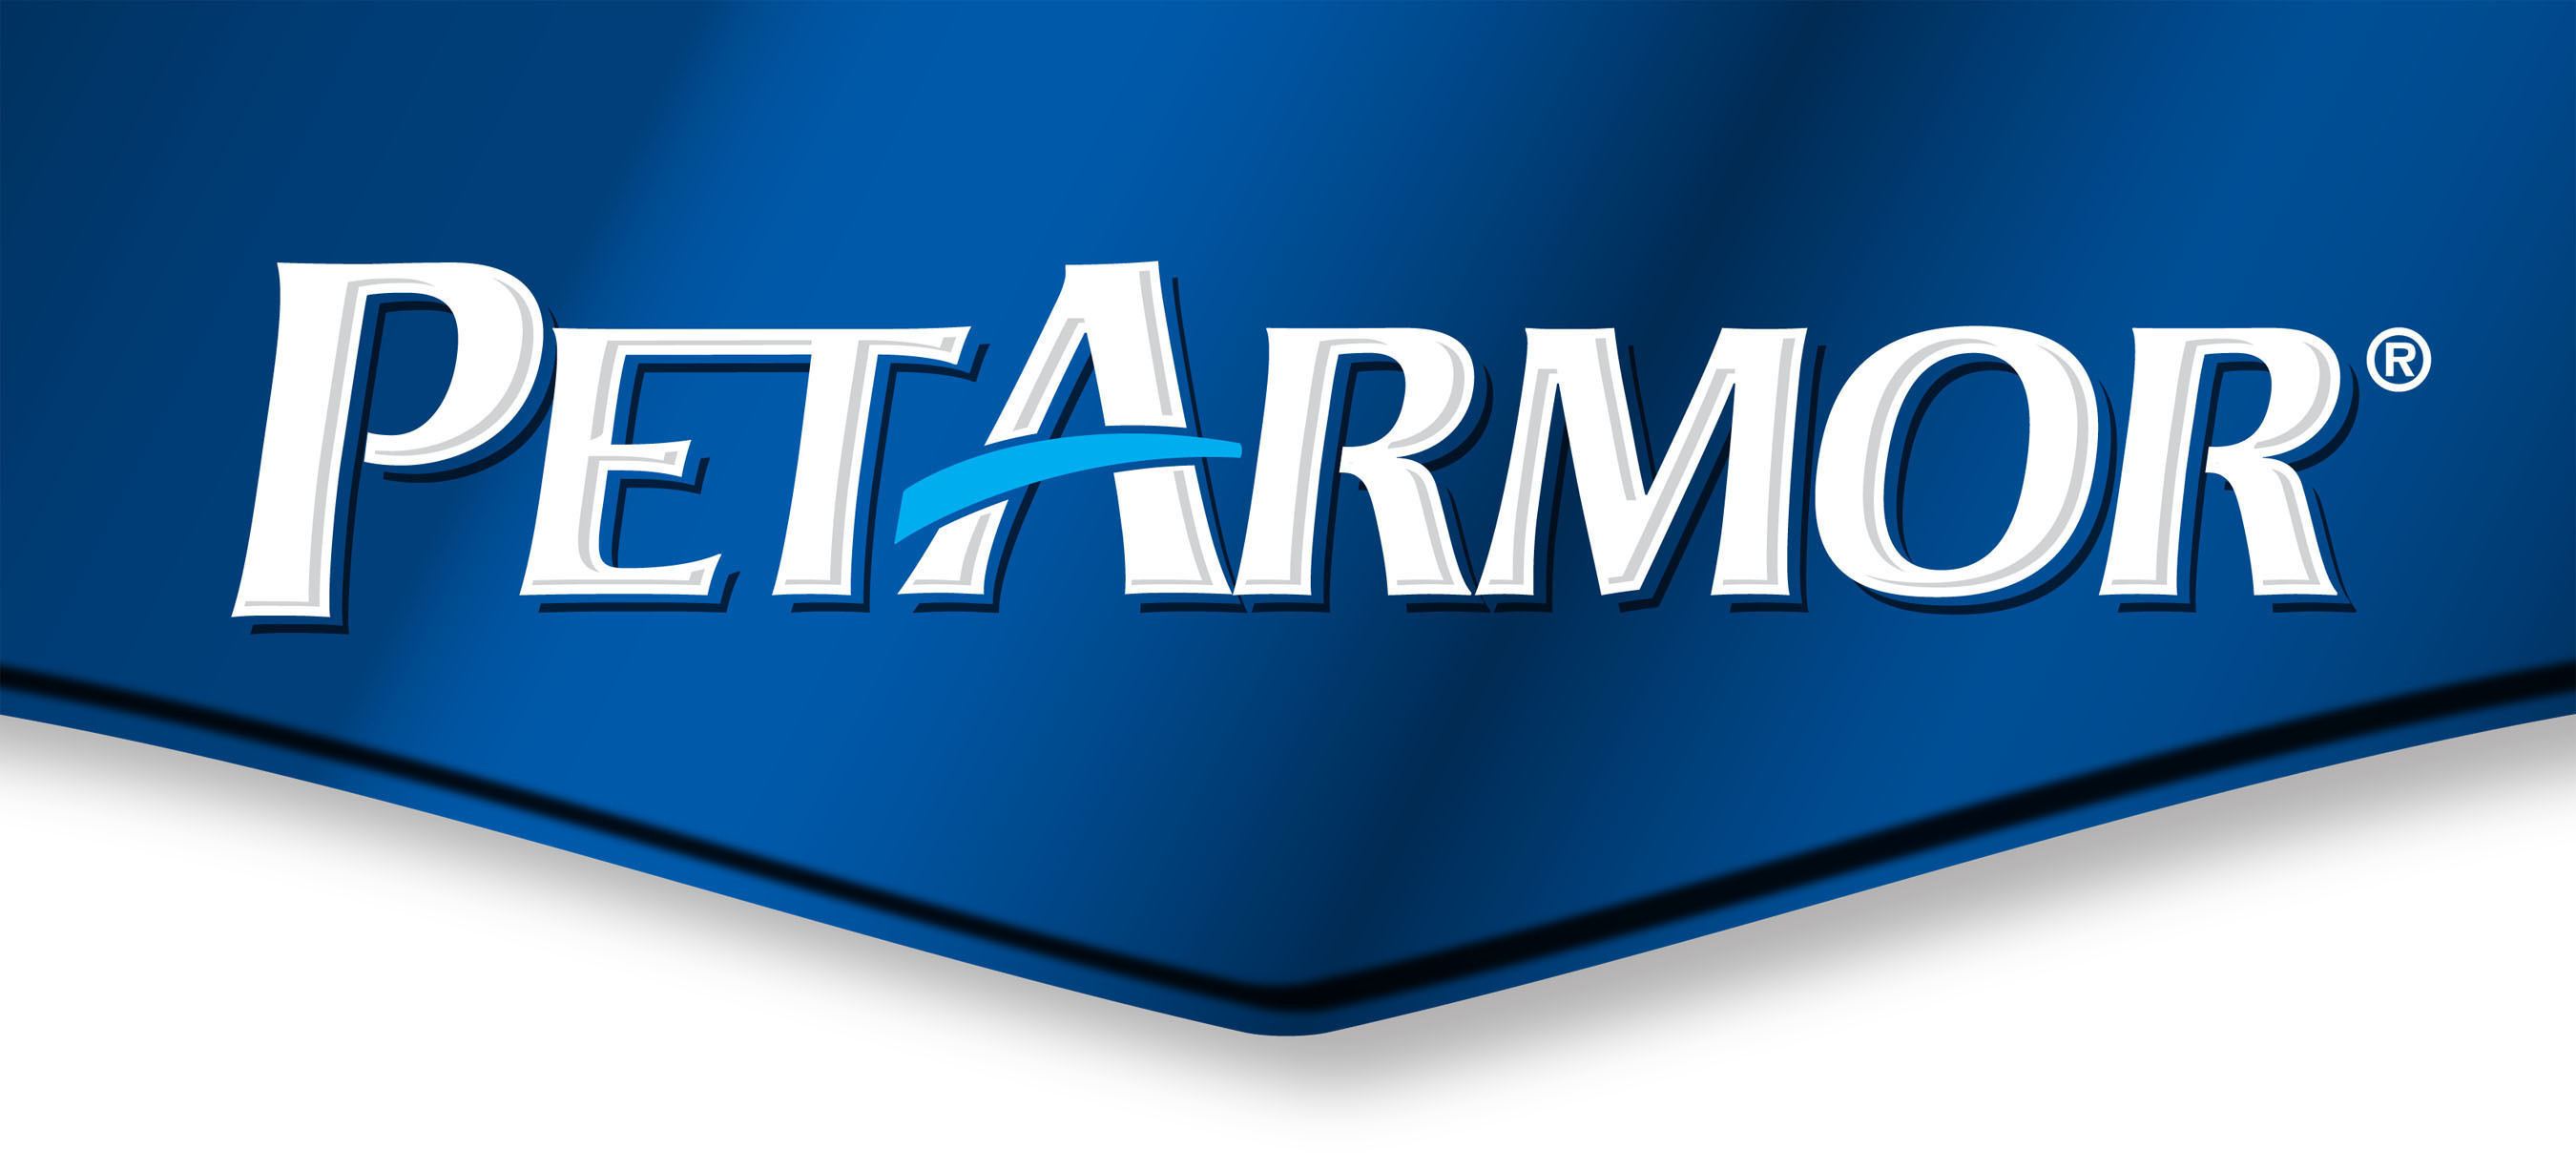 As a part of the Perrigo Company, a leading global manufacturer of OTC healthcare products, PetArmor products help improve the overall health of pets across the United States by providing vet-quality products that are affordable and accessible.